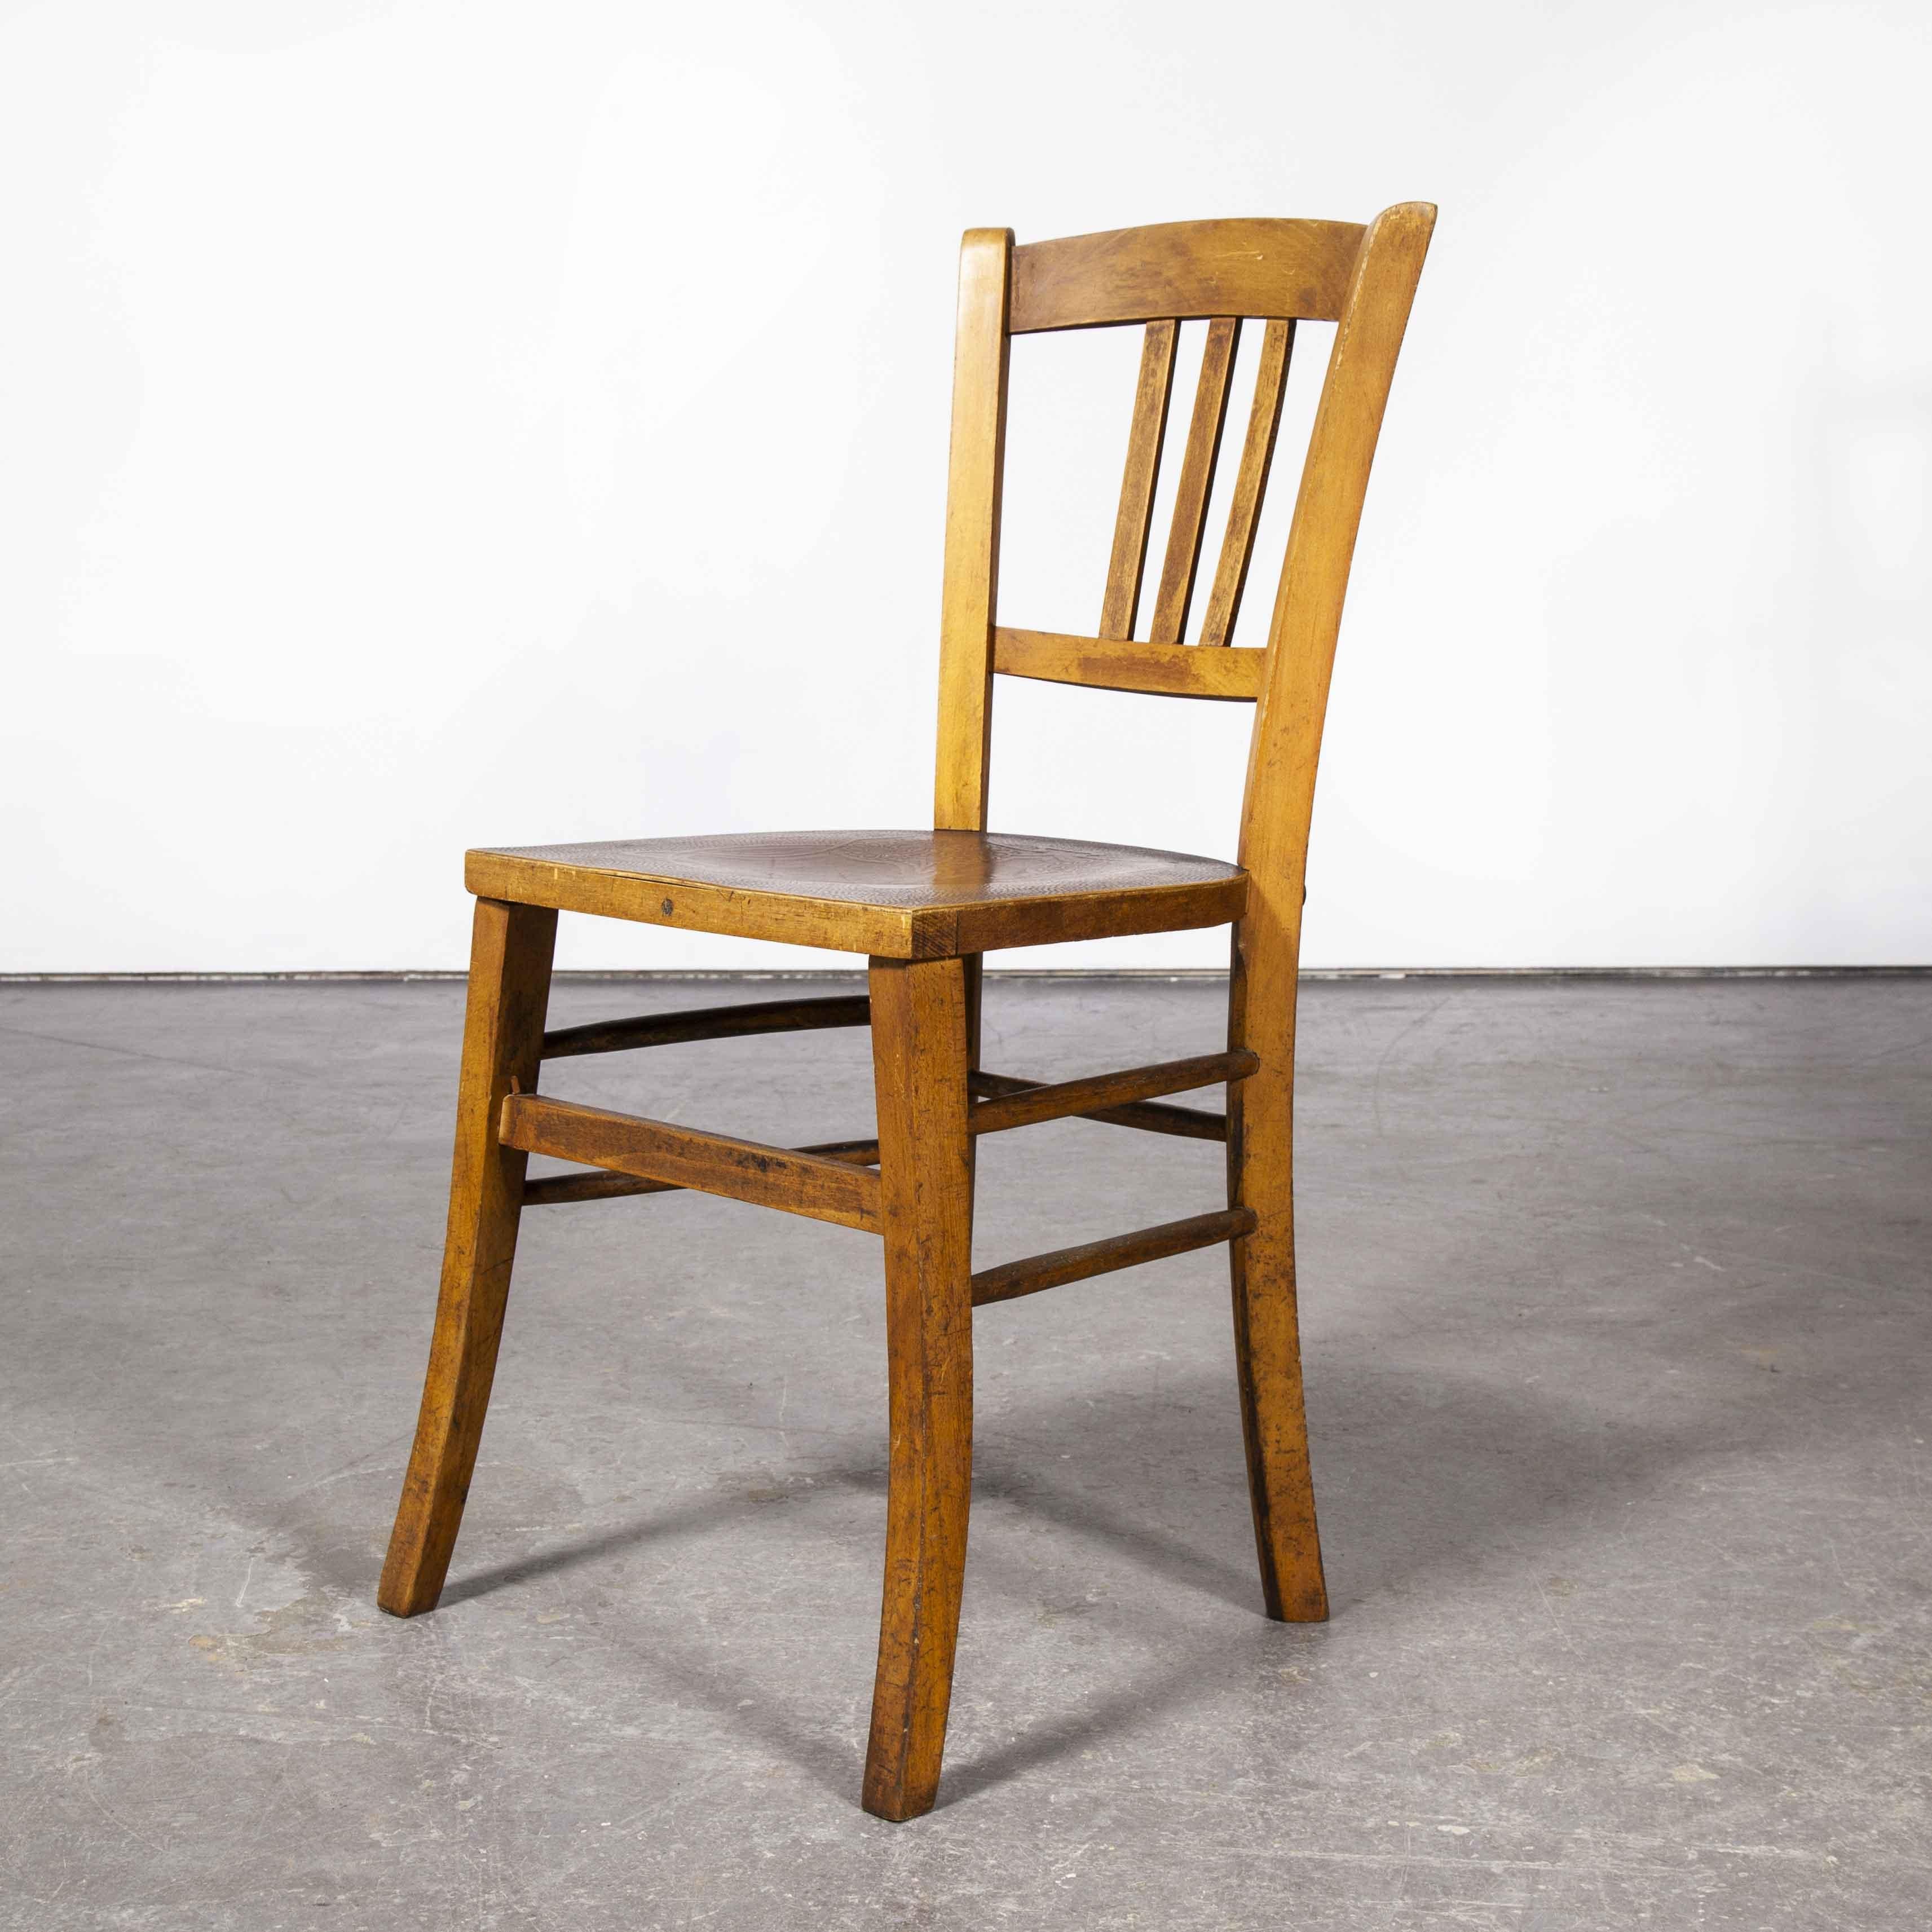 1930’s Luterma embossed seat bentwood dining chair – various quantities available

1930’s Luterma embossed seat bentwood dining chair – various quantities available. The process of steam bending beech to create elegant chairs was discovered and